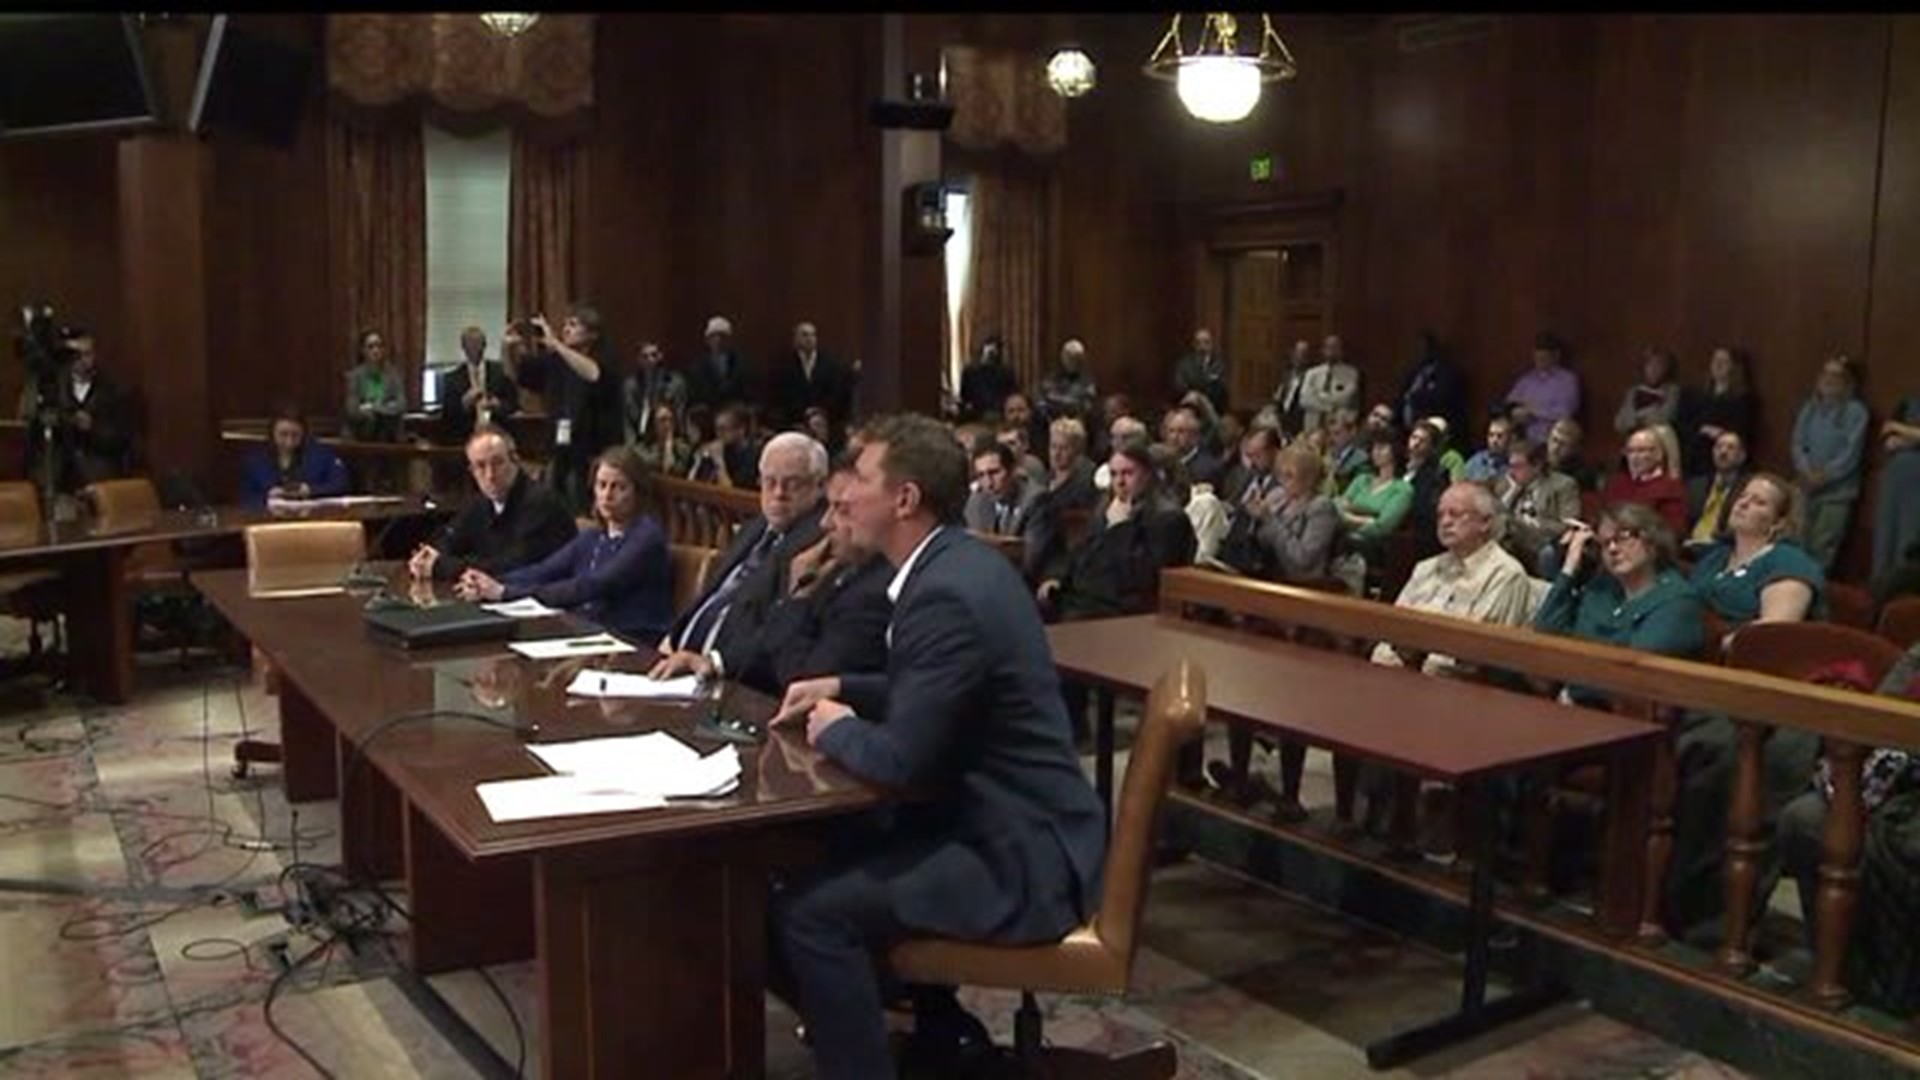 Medical Cannibis hearing continues in Harrisburg